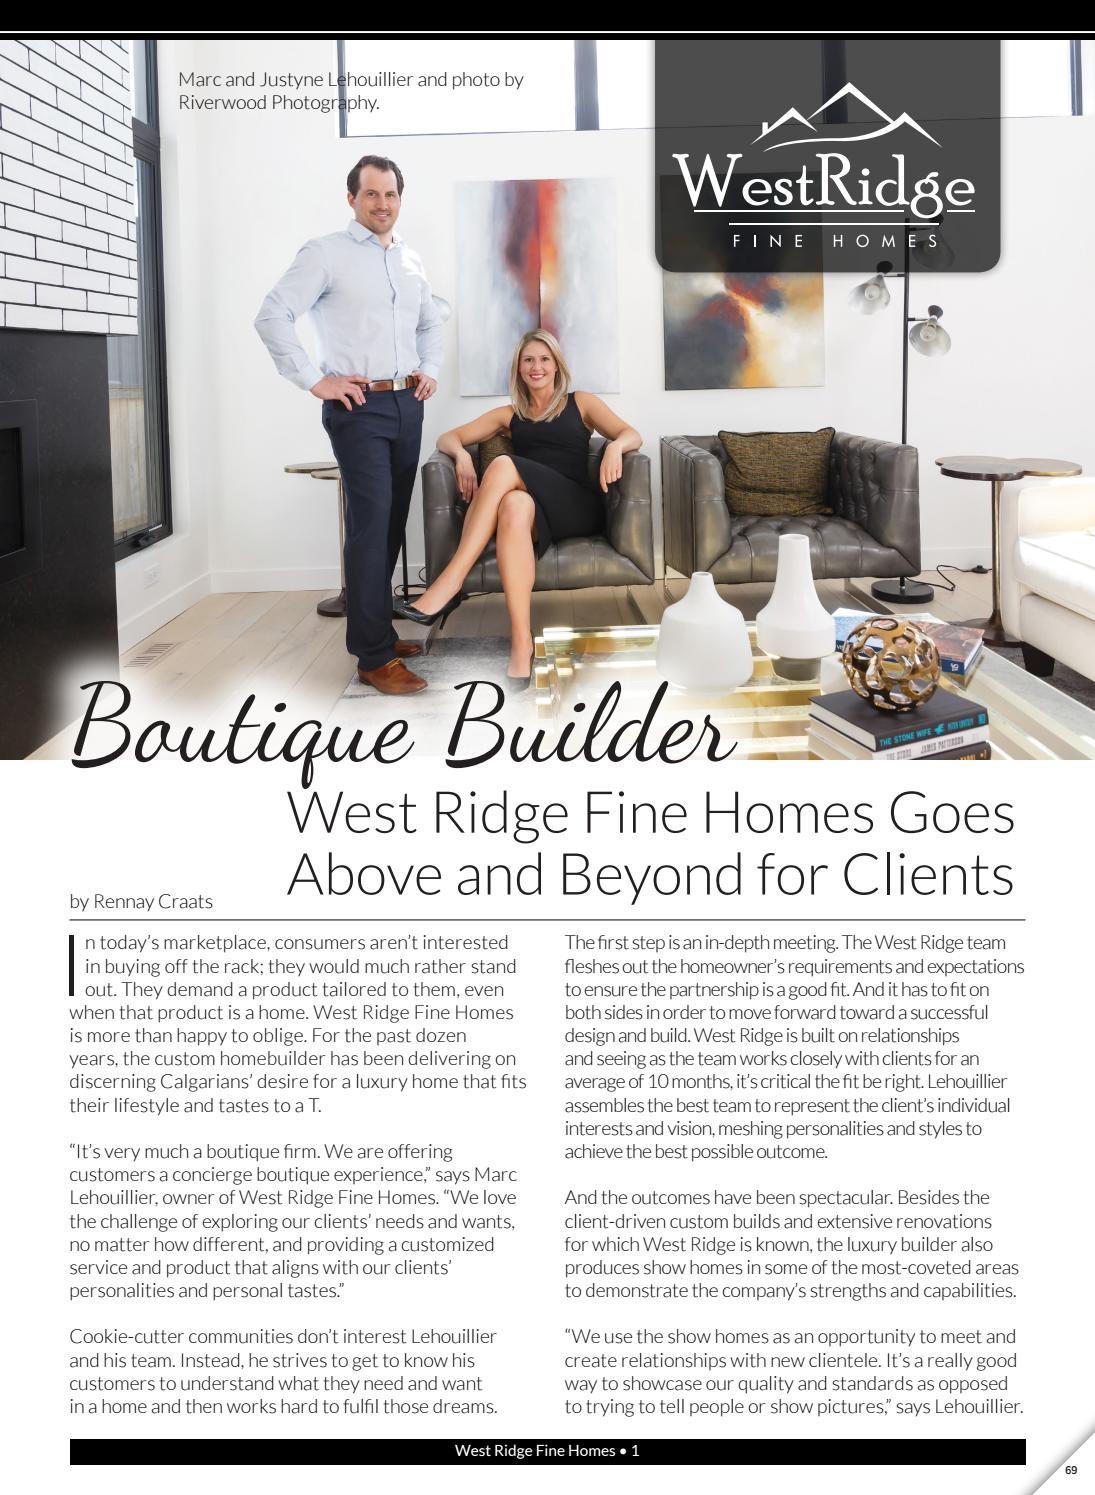 Business in Calgary Magazine - Business Profile for West Ridge Fine Homes